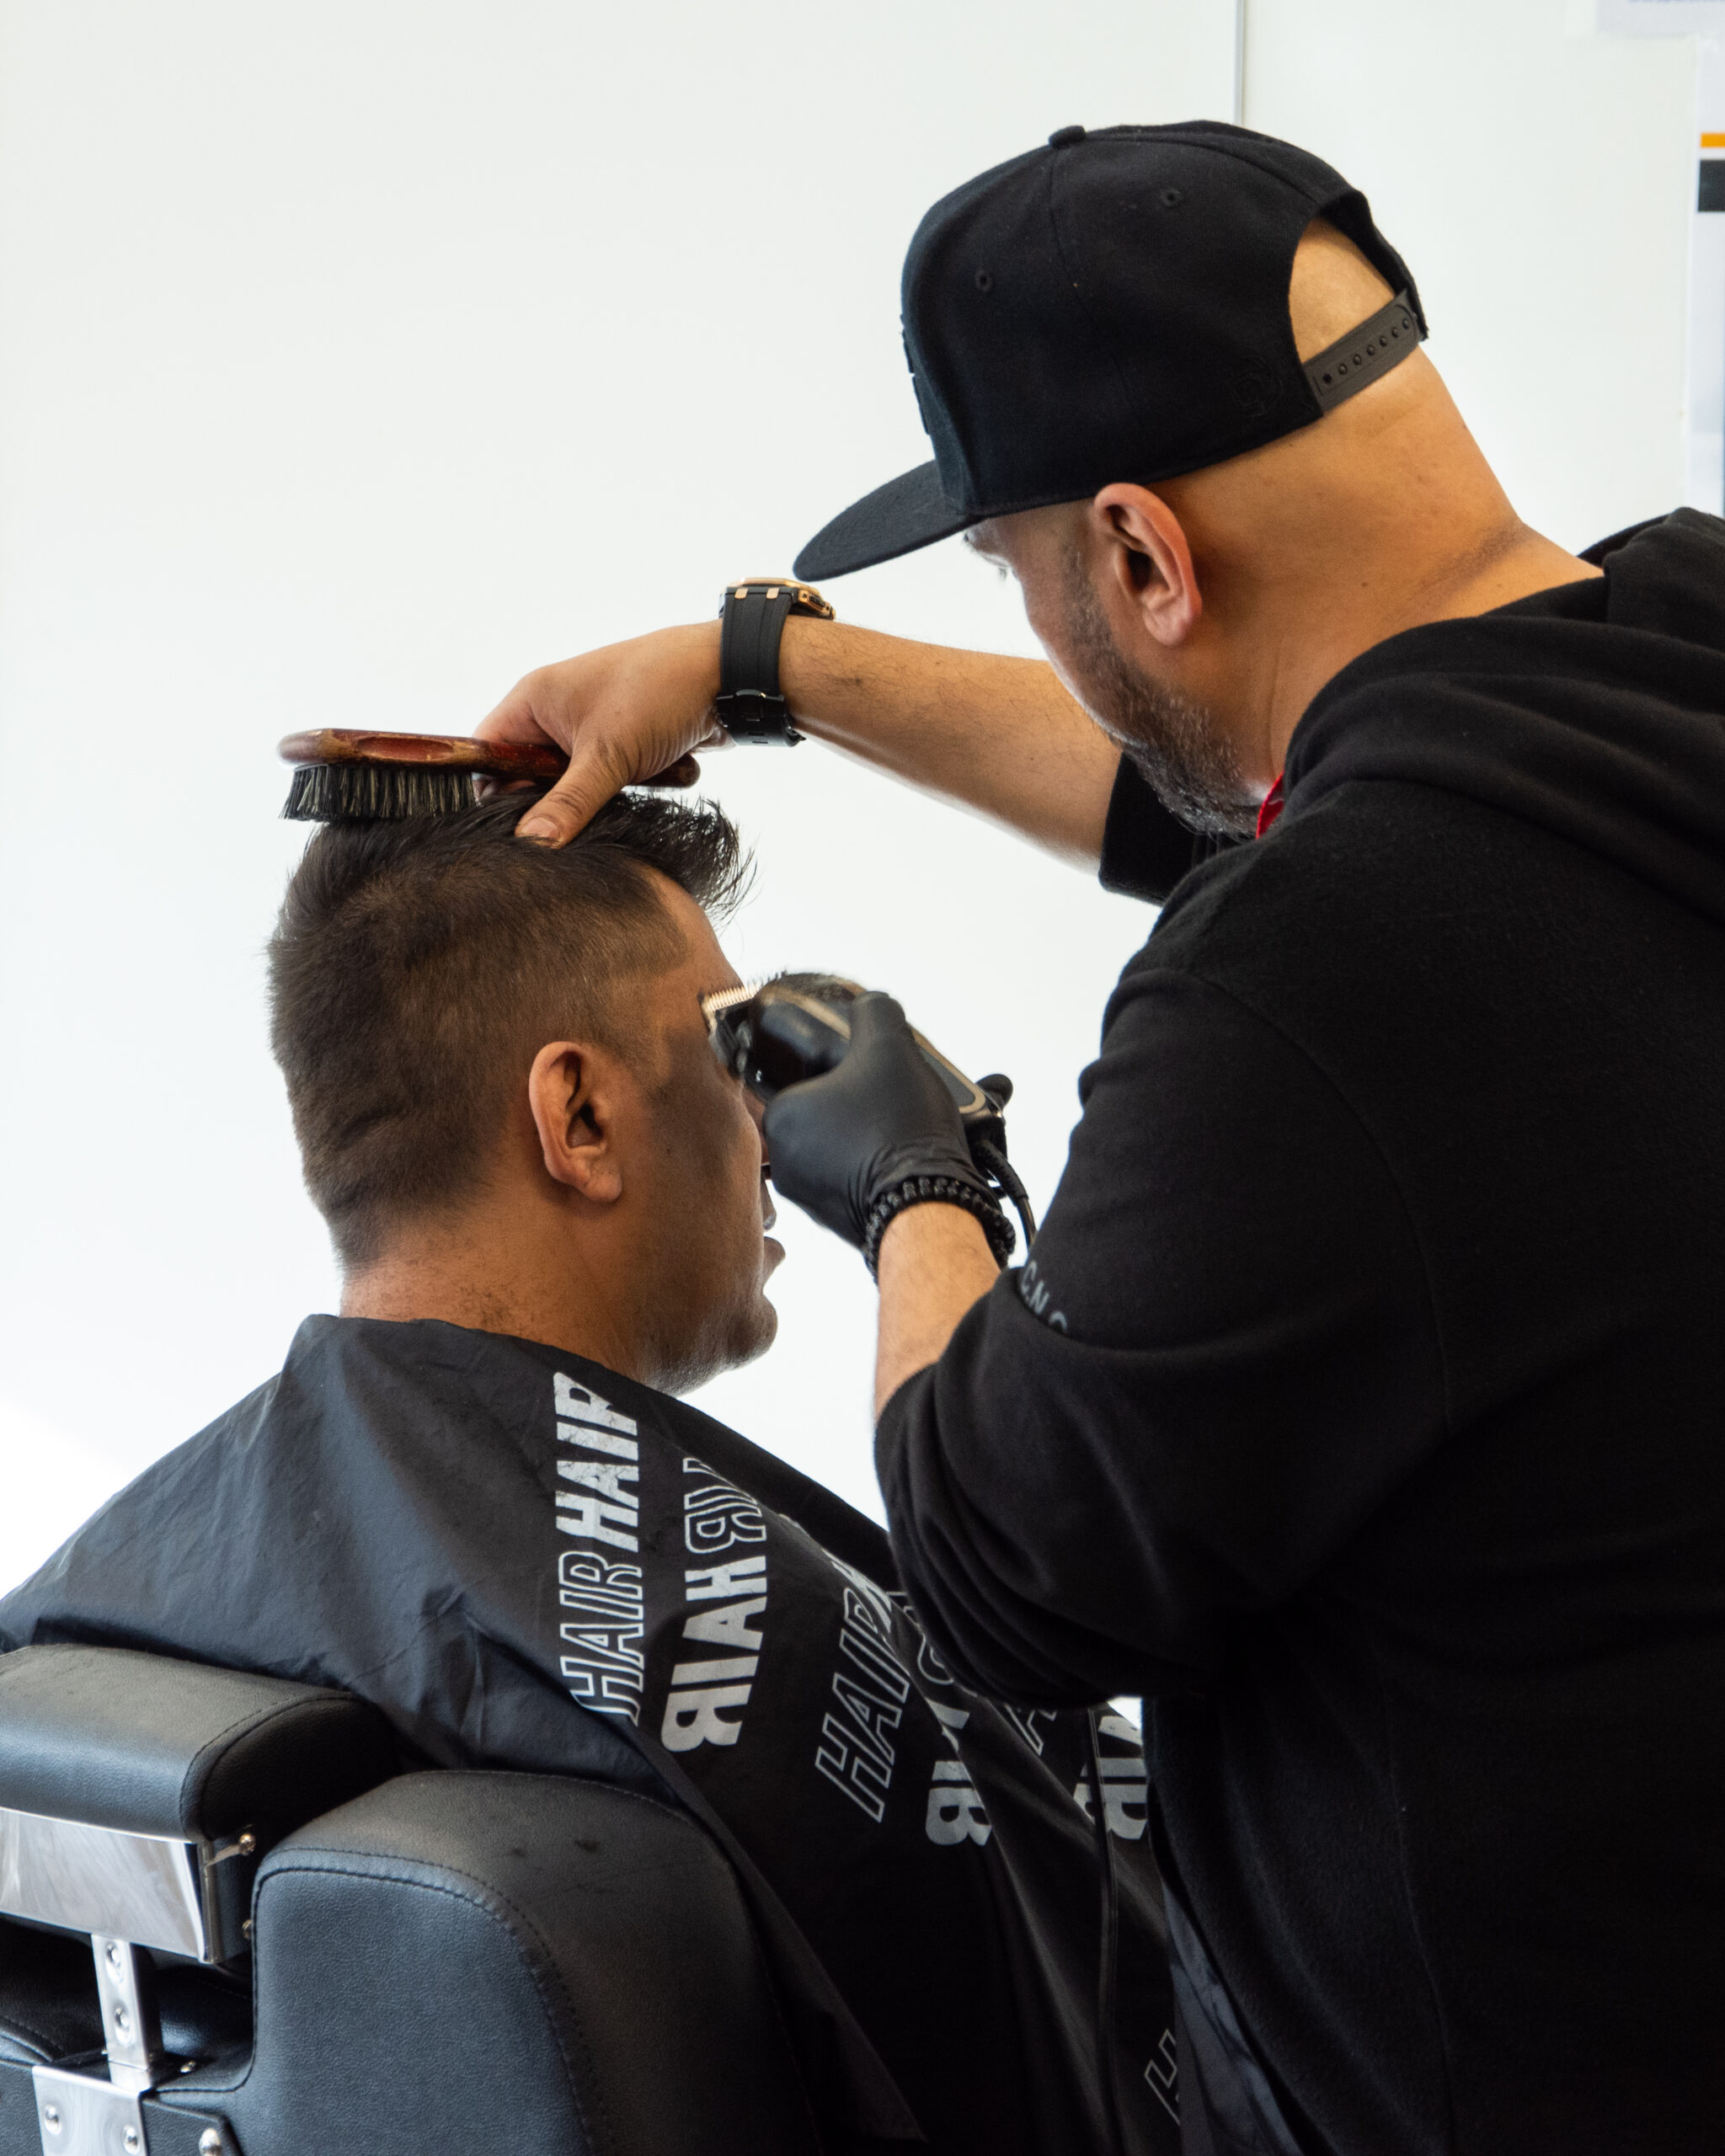 Levels 2 and 3 Apprenticeship in Barbering